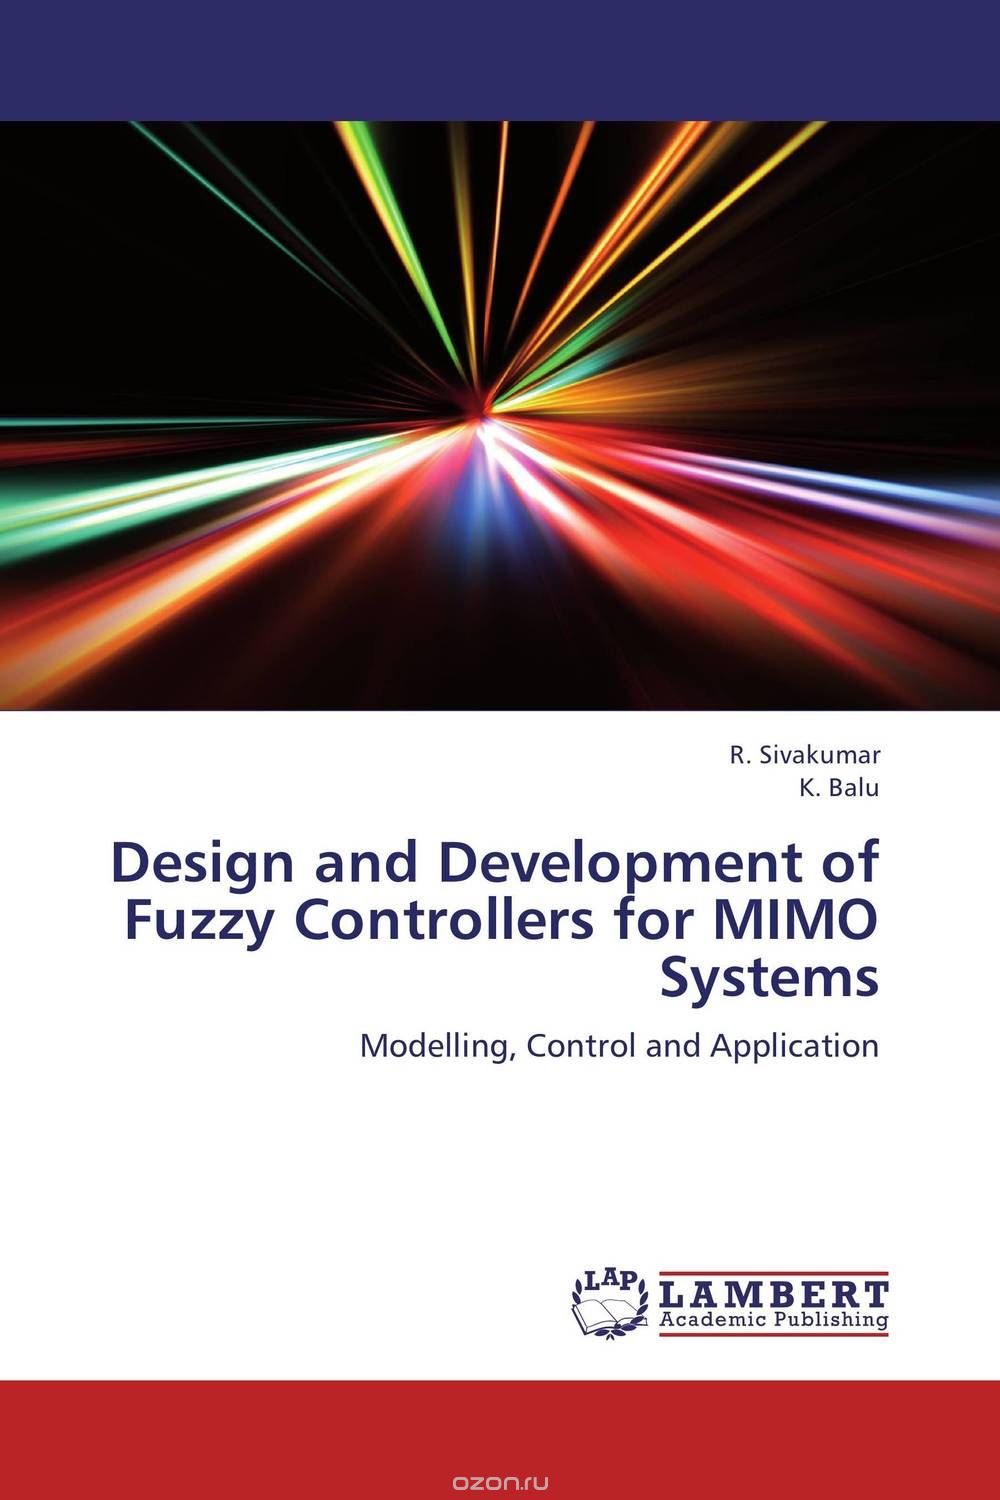 Design and Development of Fuzzy Controllers for MIMO Systems